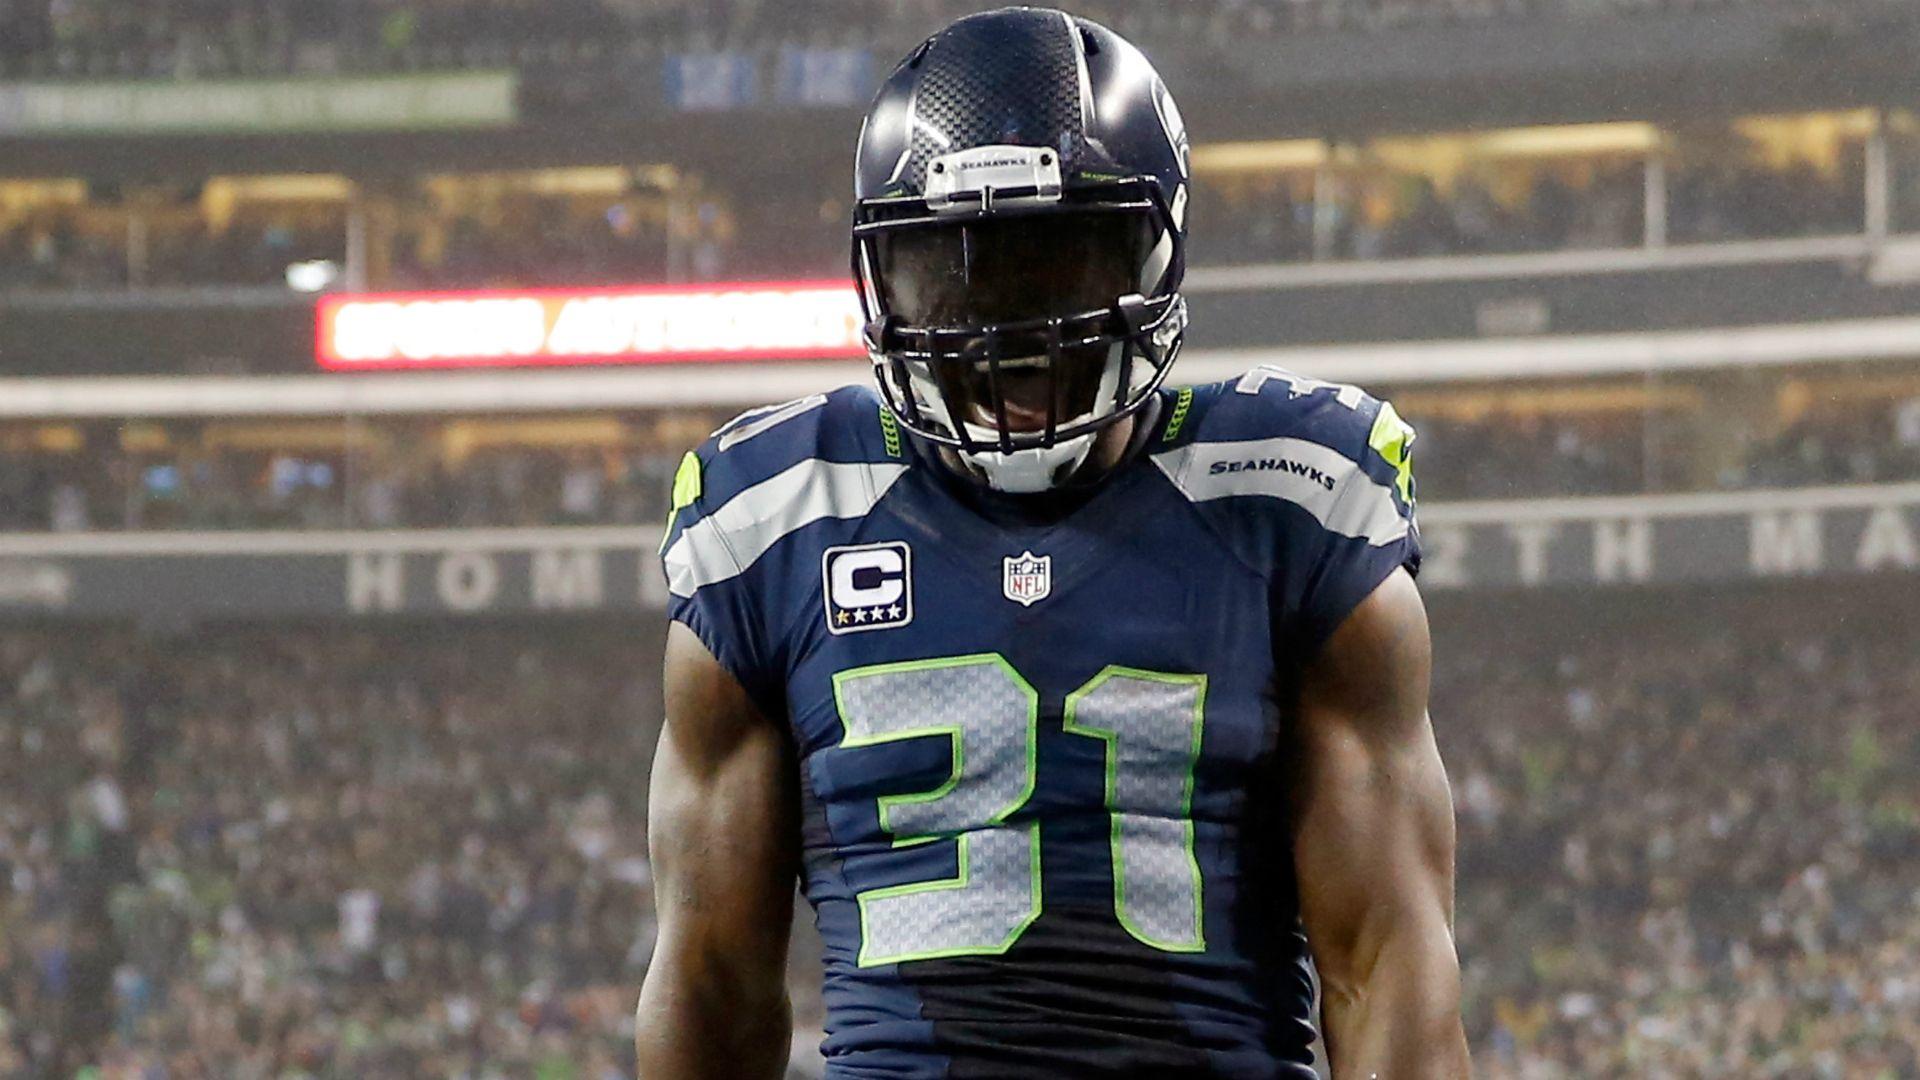 Seahawks' Kam Chancellor upset at 'No Fun League' for proposed